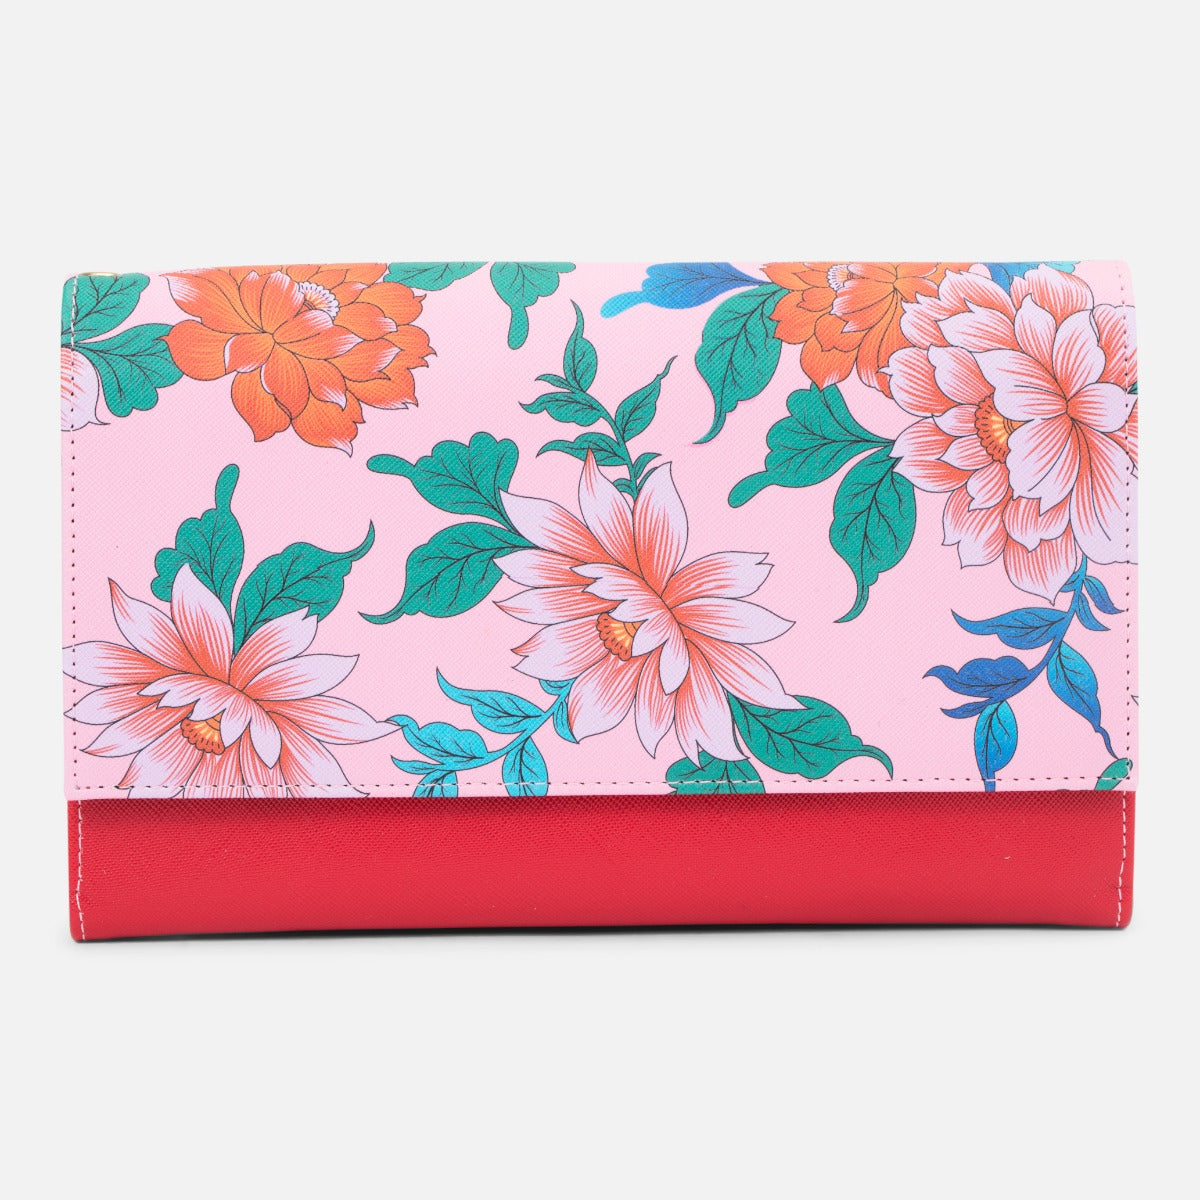 Travel documents holder with vintage flowers   